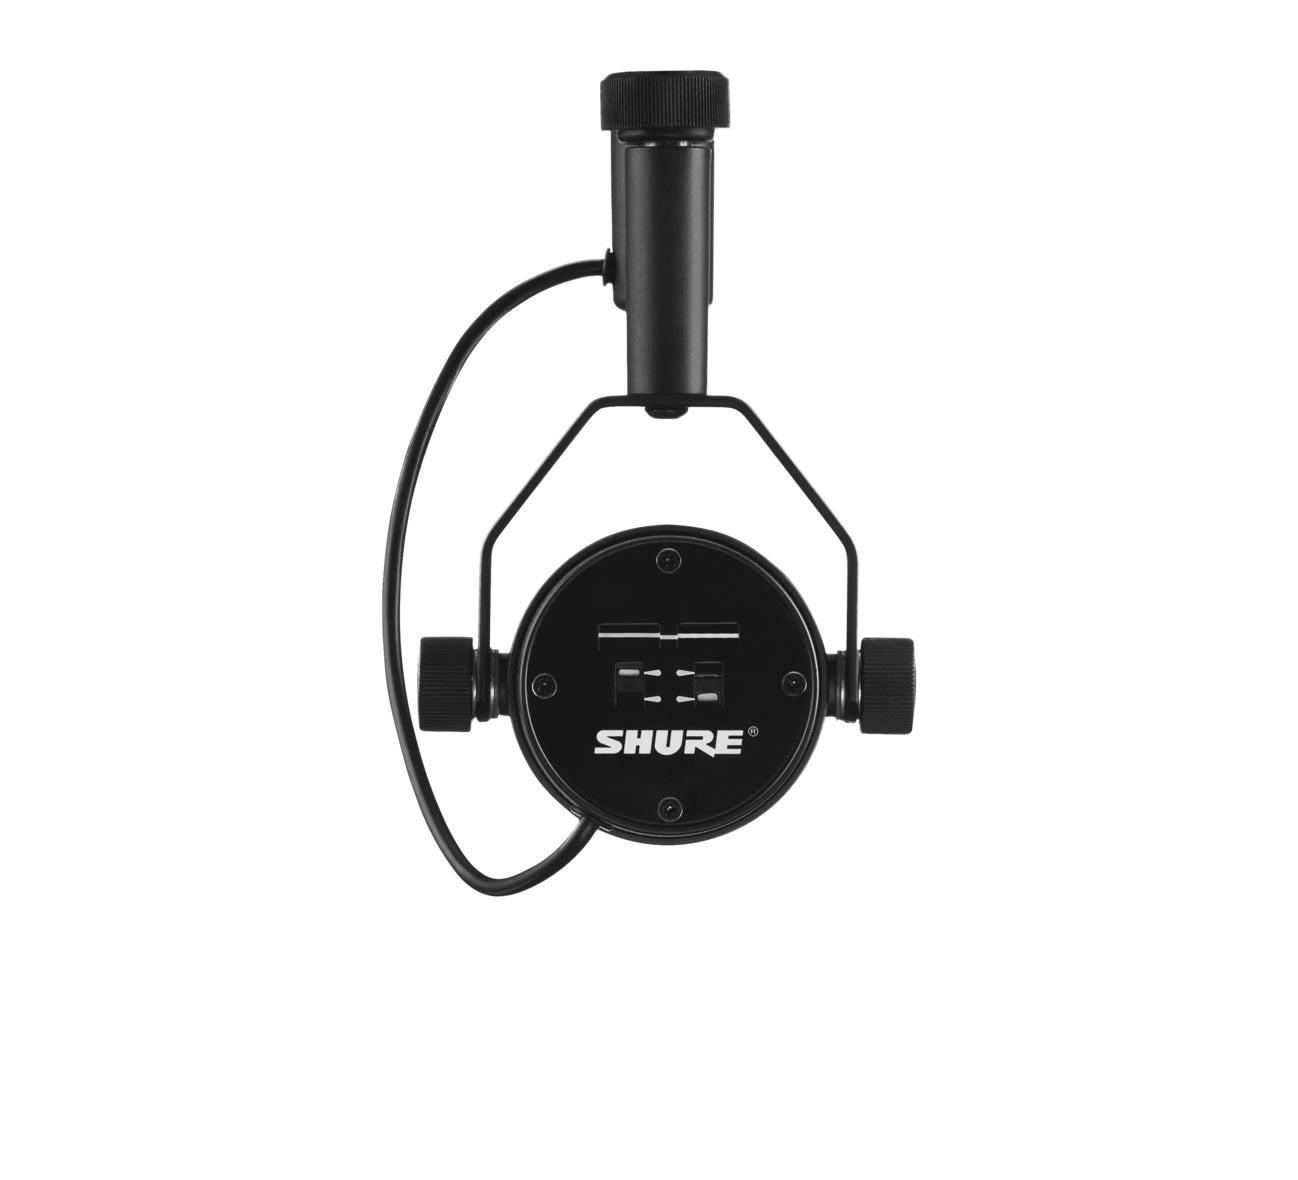 Rear view of the Shure SM7B Dynamic Vocal Microphone